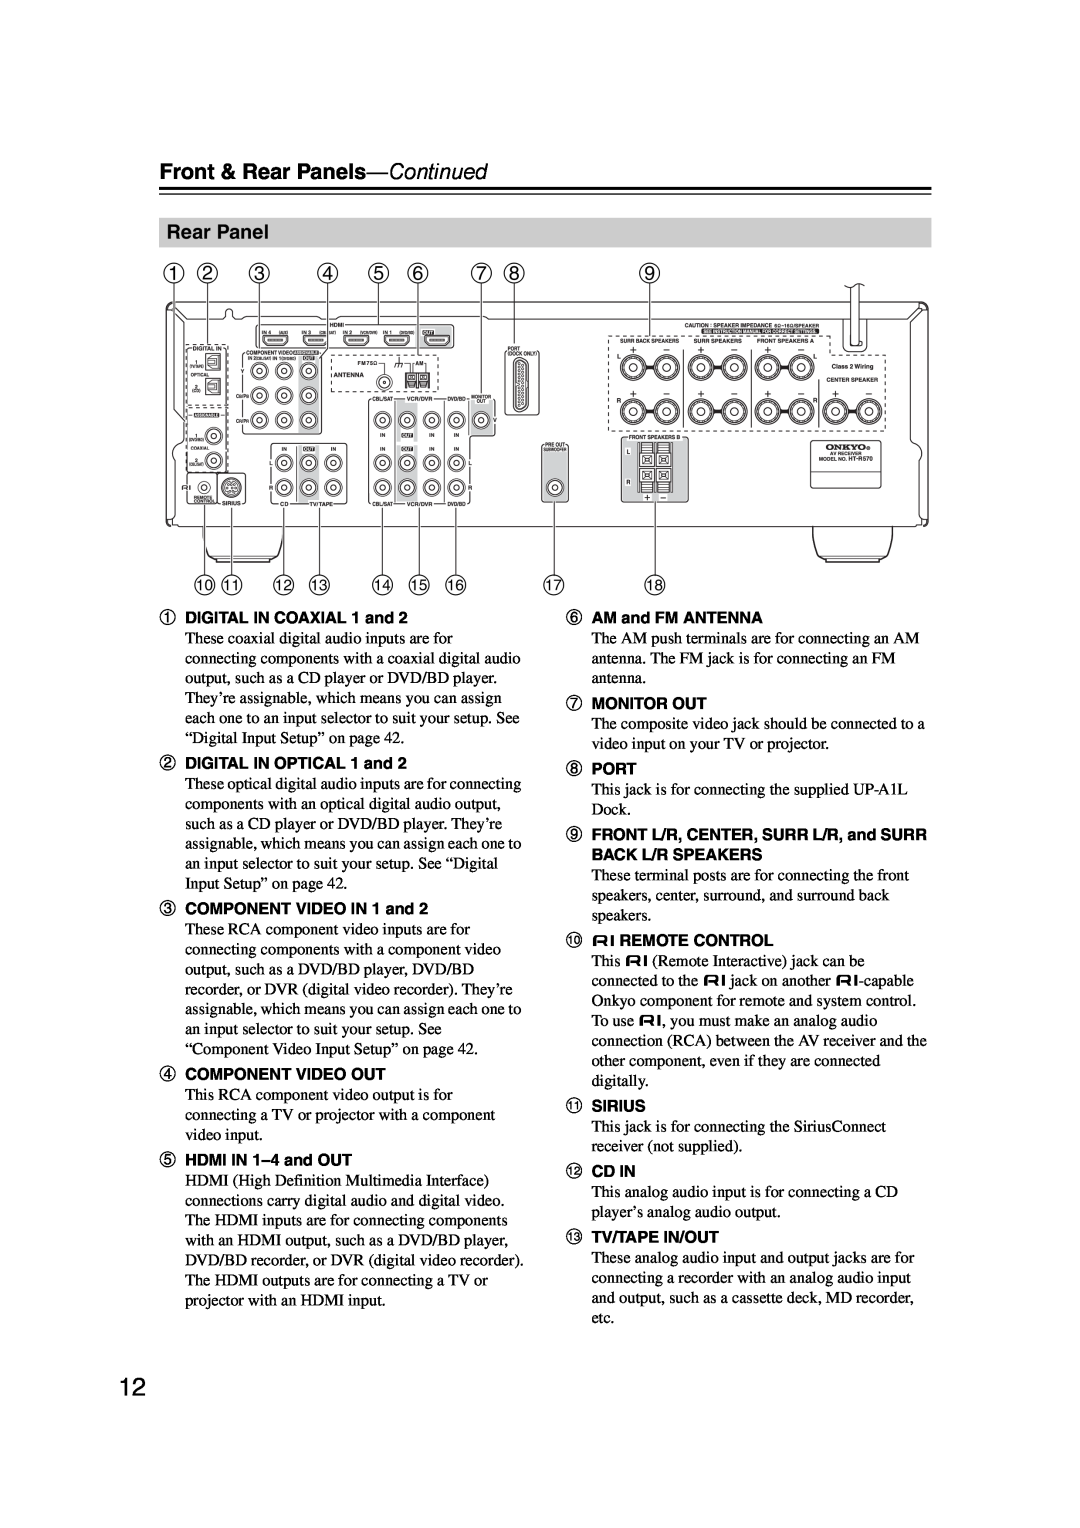 Onkyo 29344934 instruction manual a b c d e f g h, j k l m n o p, Front & Rear Panels—Continued 